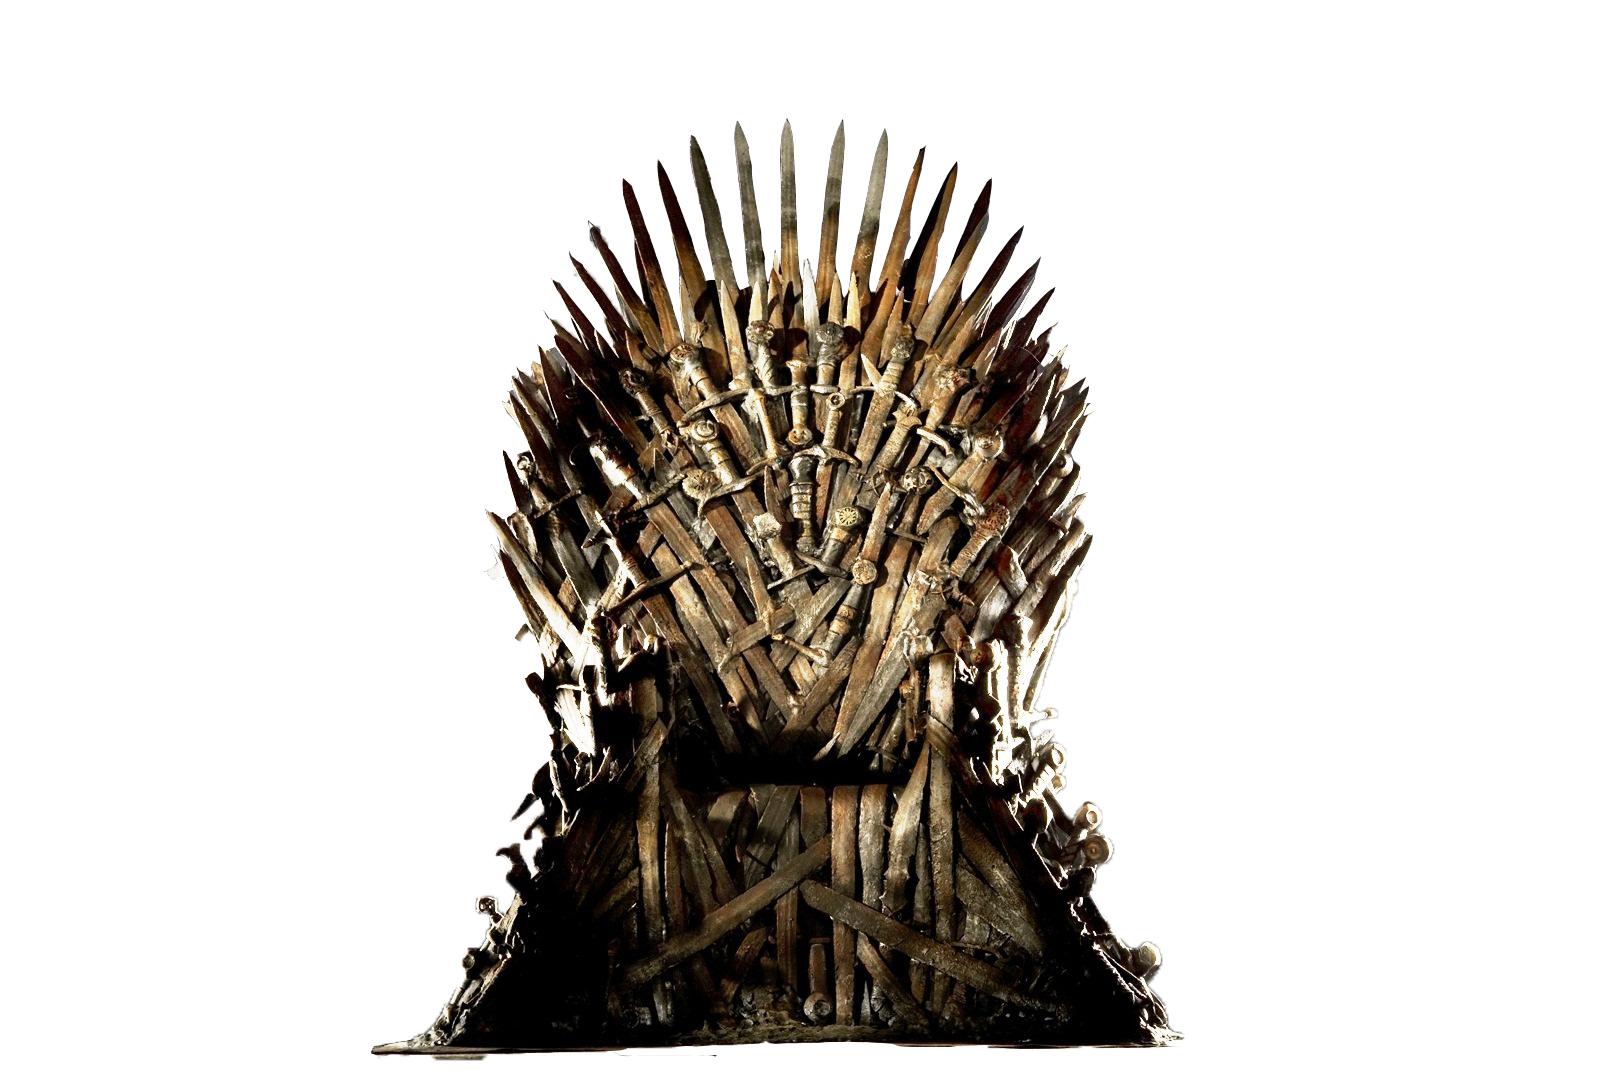 19 Game Of Thrones Png Transparent Library Huge Freebie - Game Of